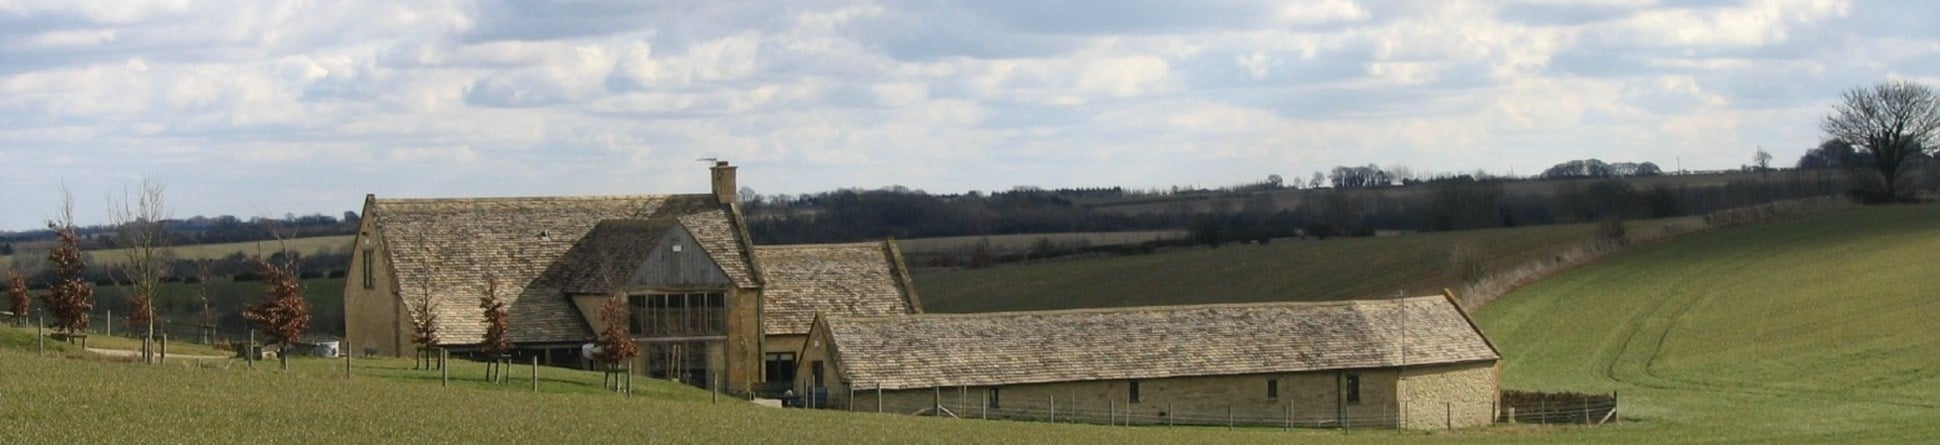 Stone farmhouse and building set in gently rolling landscape of fields of grass.